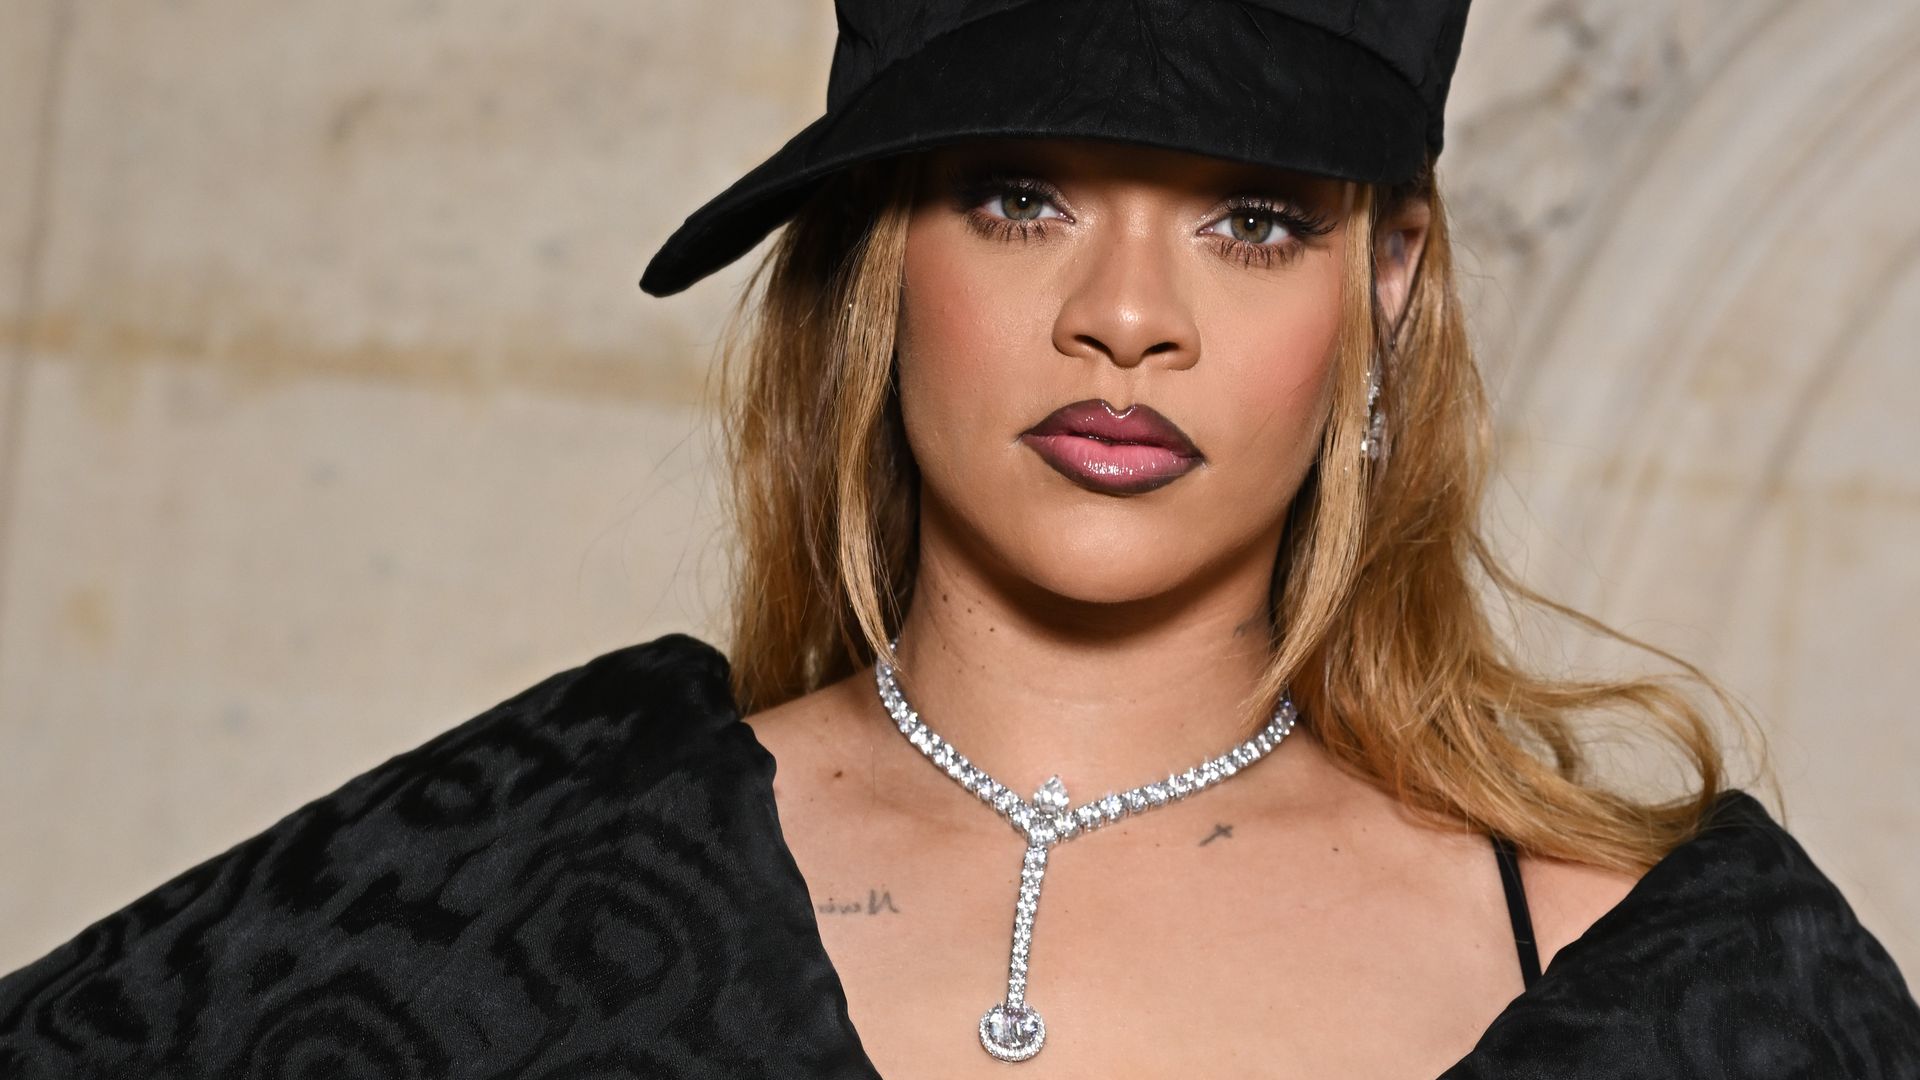 Rihanna becomes the new face of Dior's iconic J'Adore fragrance